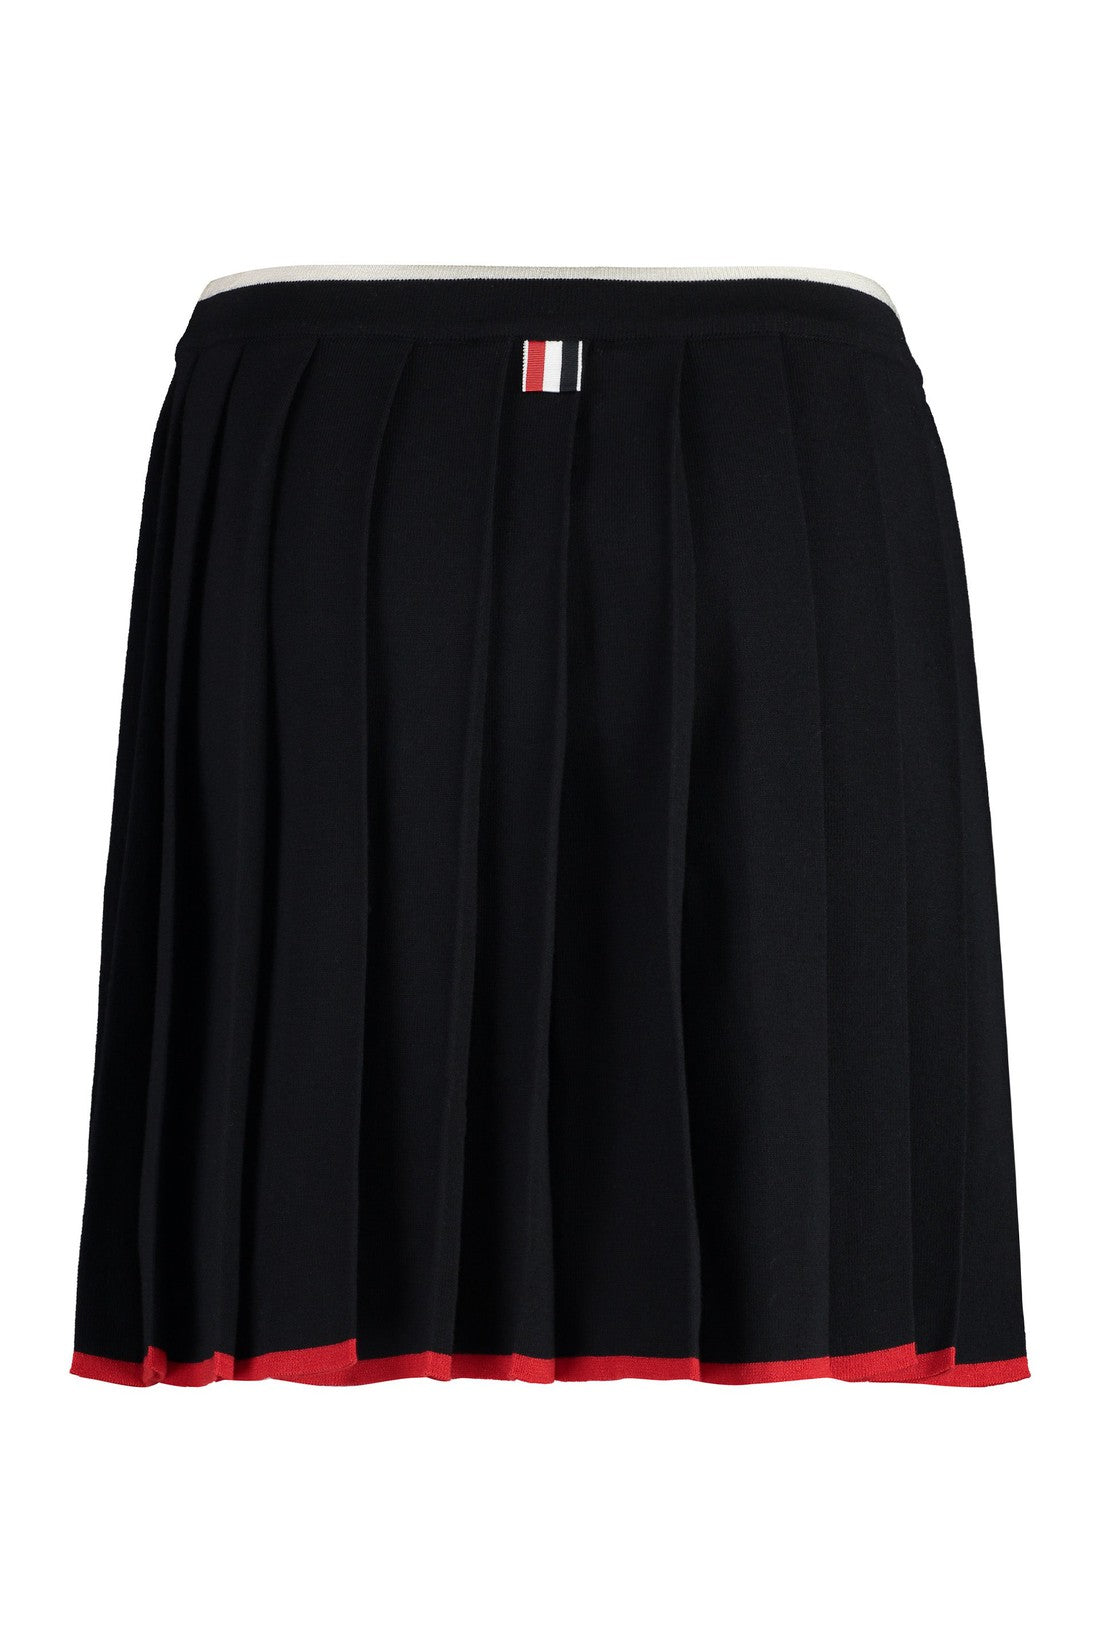 Thom Browne-OUTLET-SALE-Knitted mini skirt-ARCHIVIST